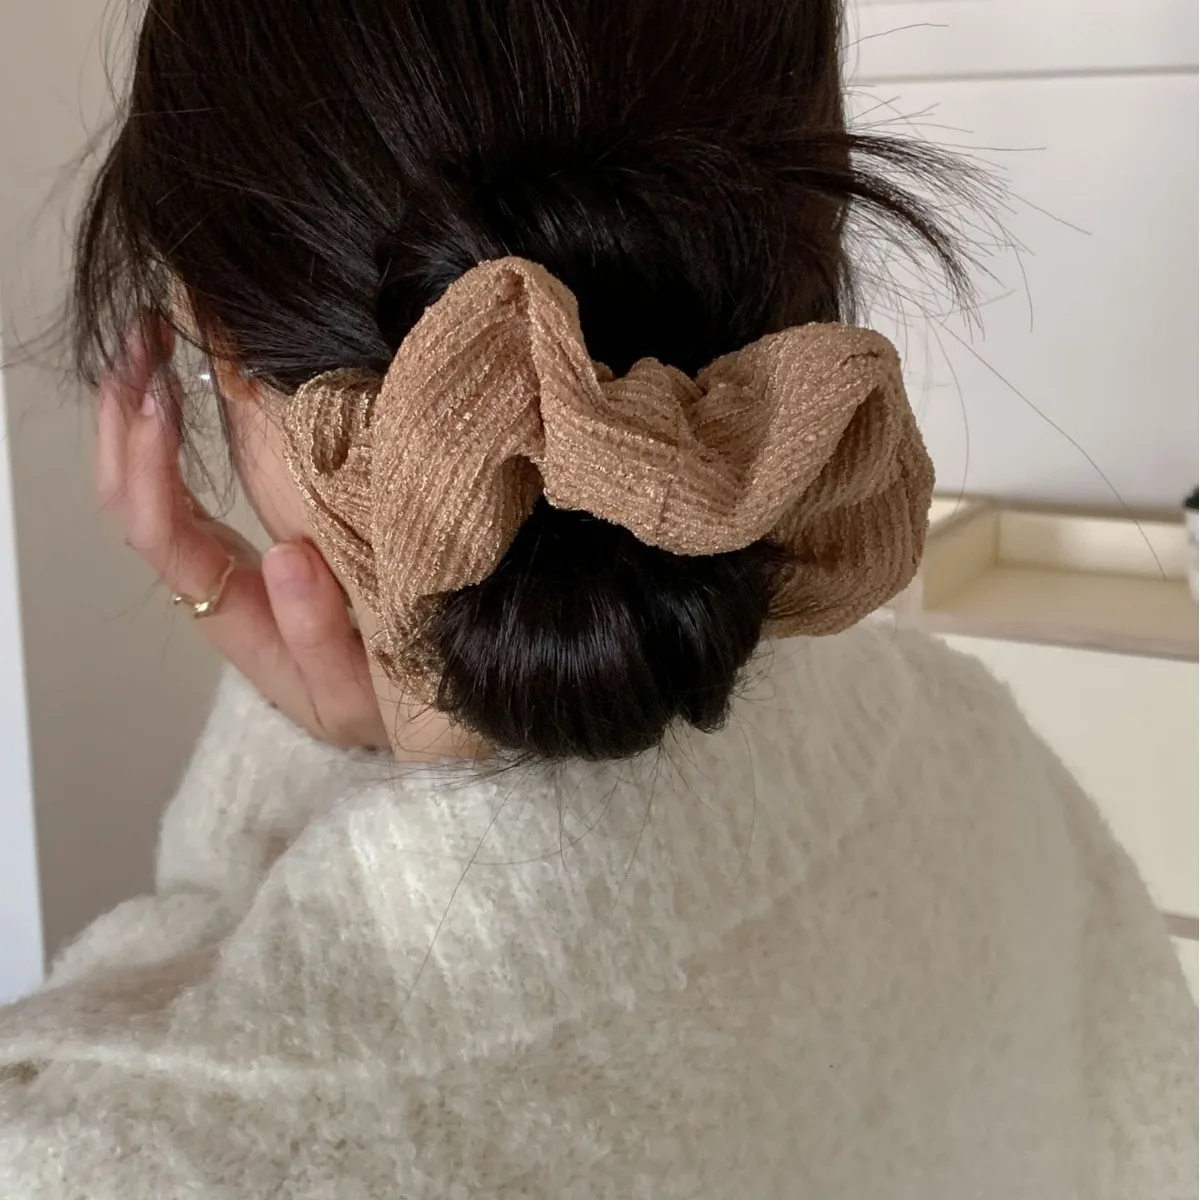 New Woman Simplicity fold Scrunchies Senior Elastic Hairband Girls Rubber Band Lady Hair Ties Ponytail Holder Hair Accessories women s summer dress sexy off shoulder rivets office lady elegant slim fit party dress fold over peplum wrapped mini dress